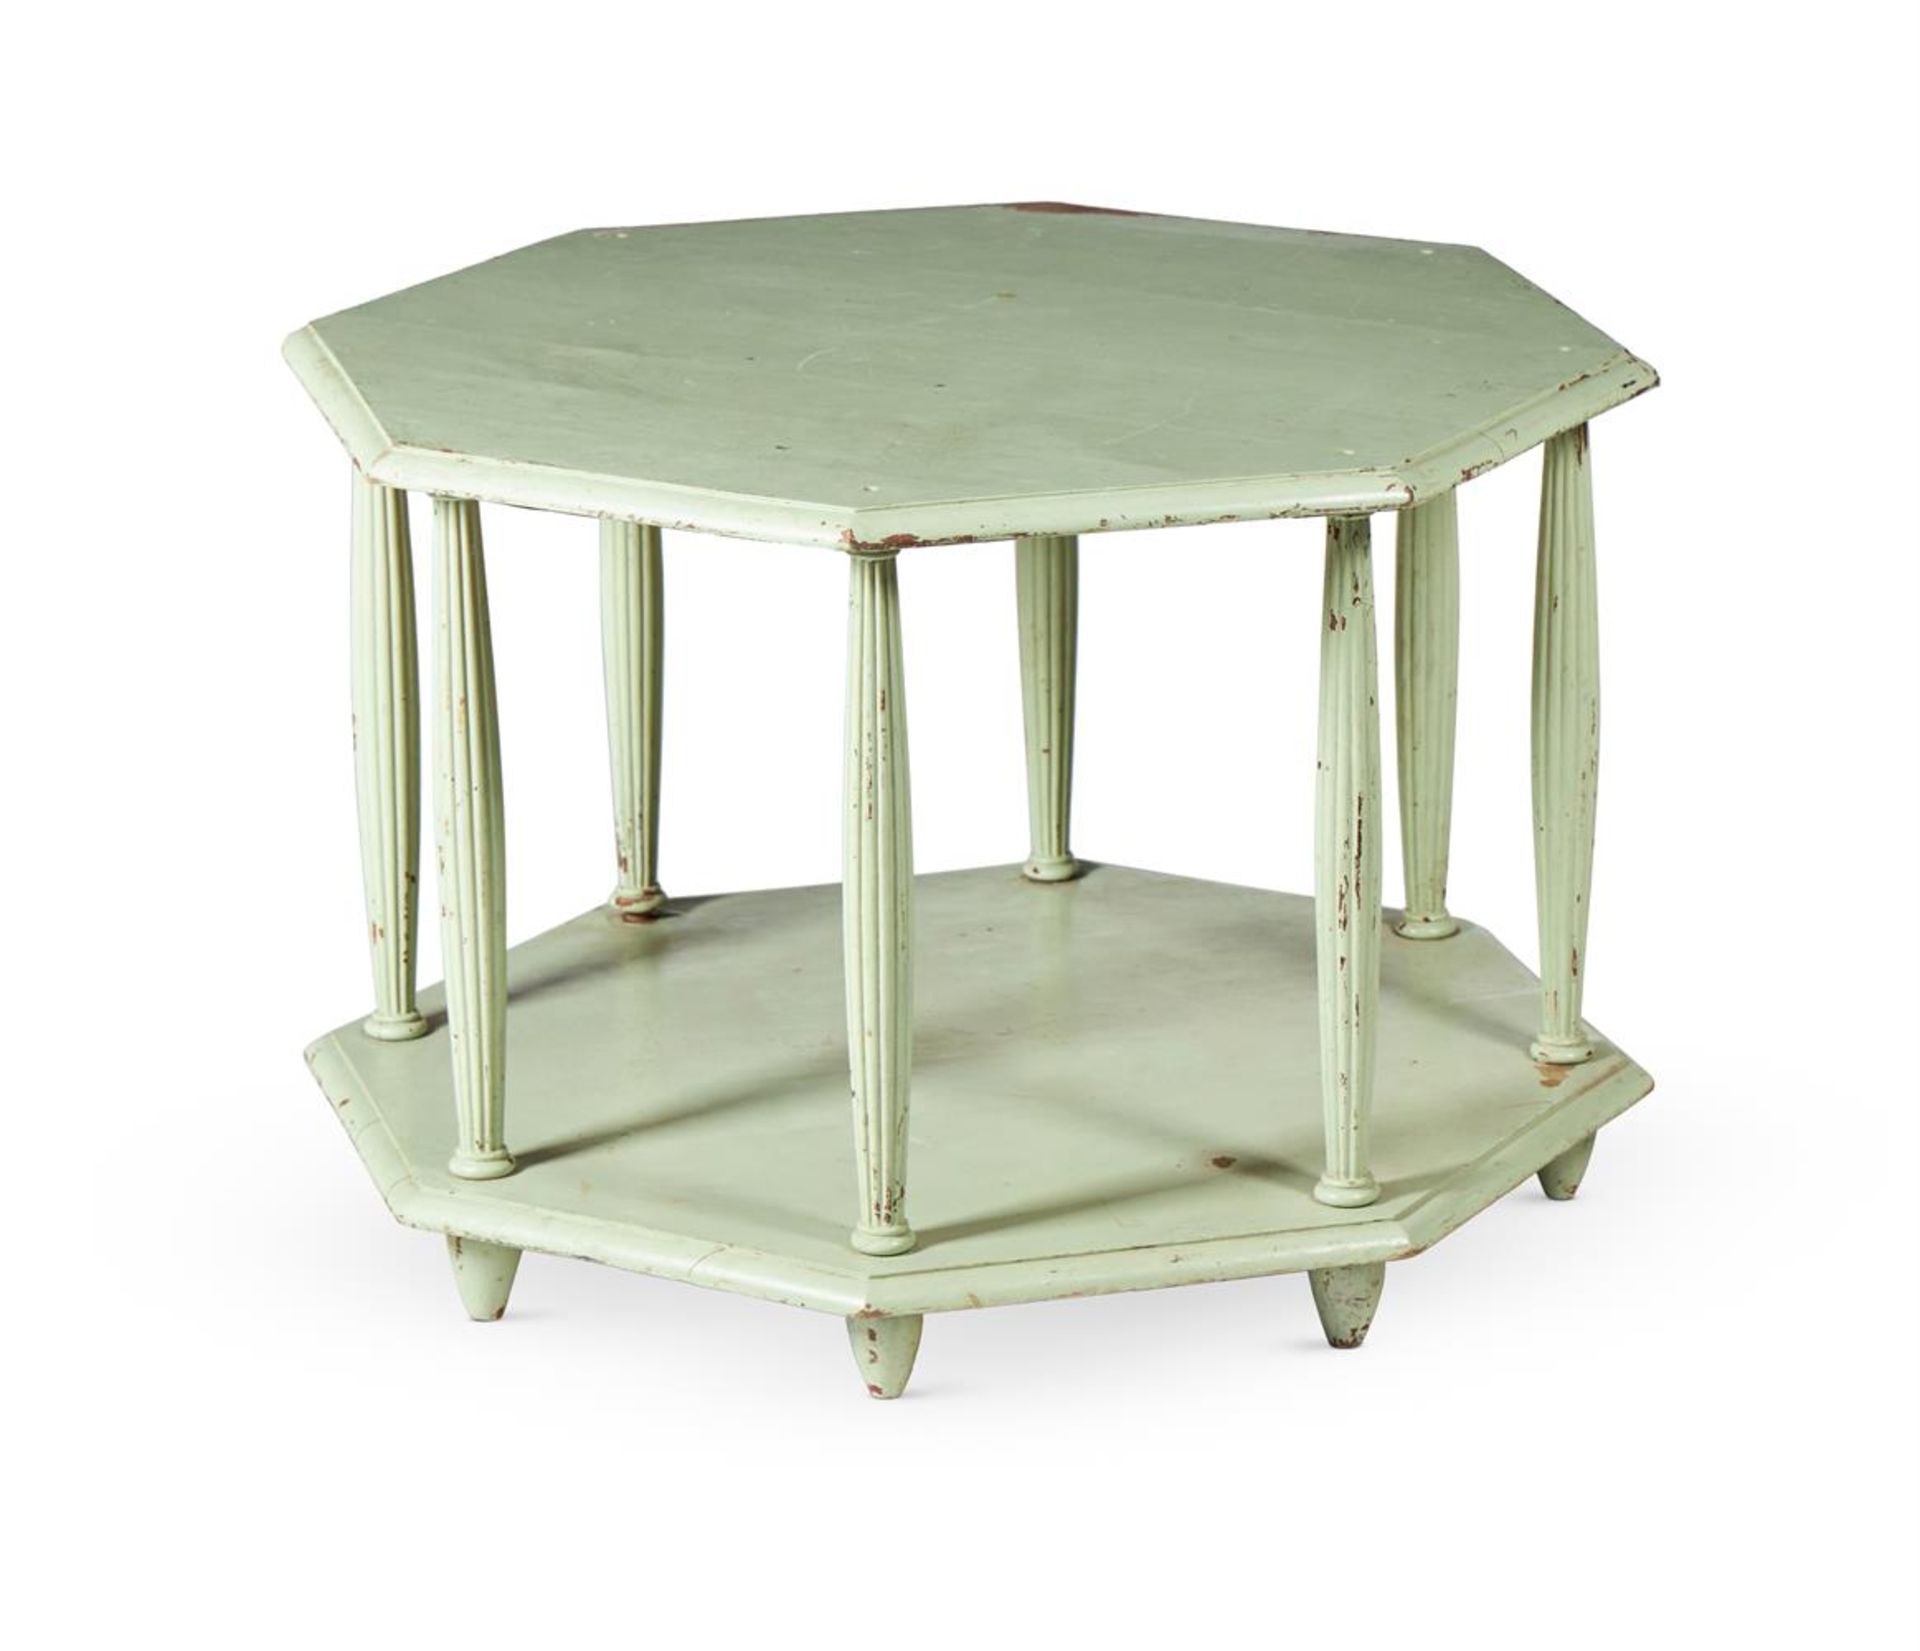 A GREEN PAINTED OCTAGONAL TWO-TIER CENTRE TABLE MID 20TH CENTURY - Image 3 of 4